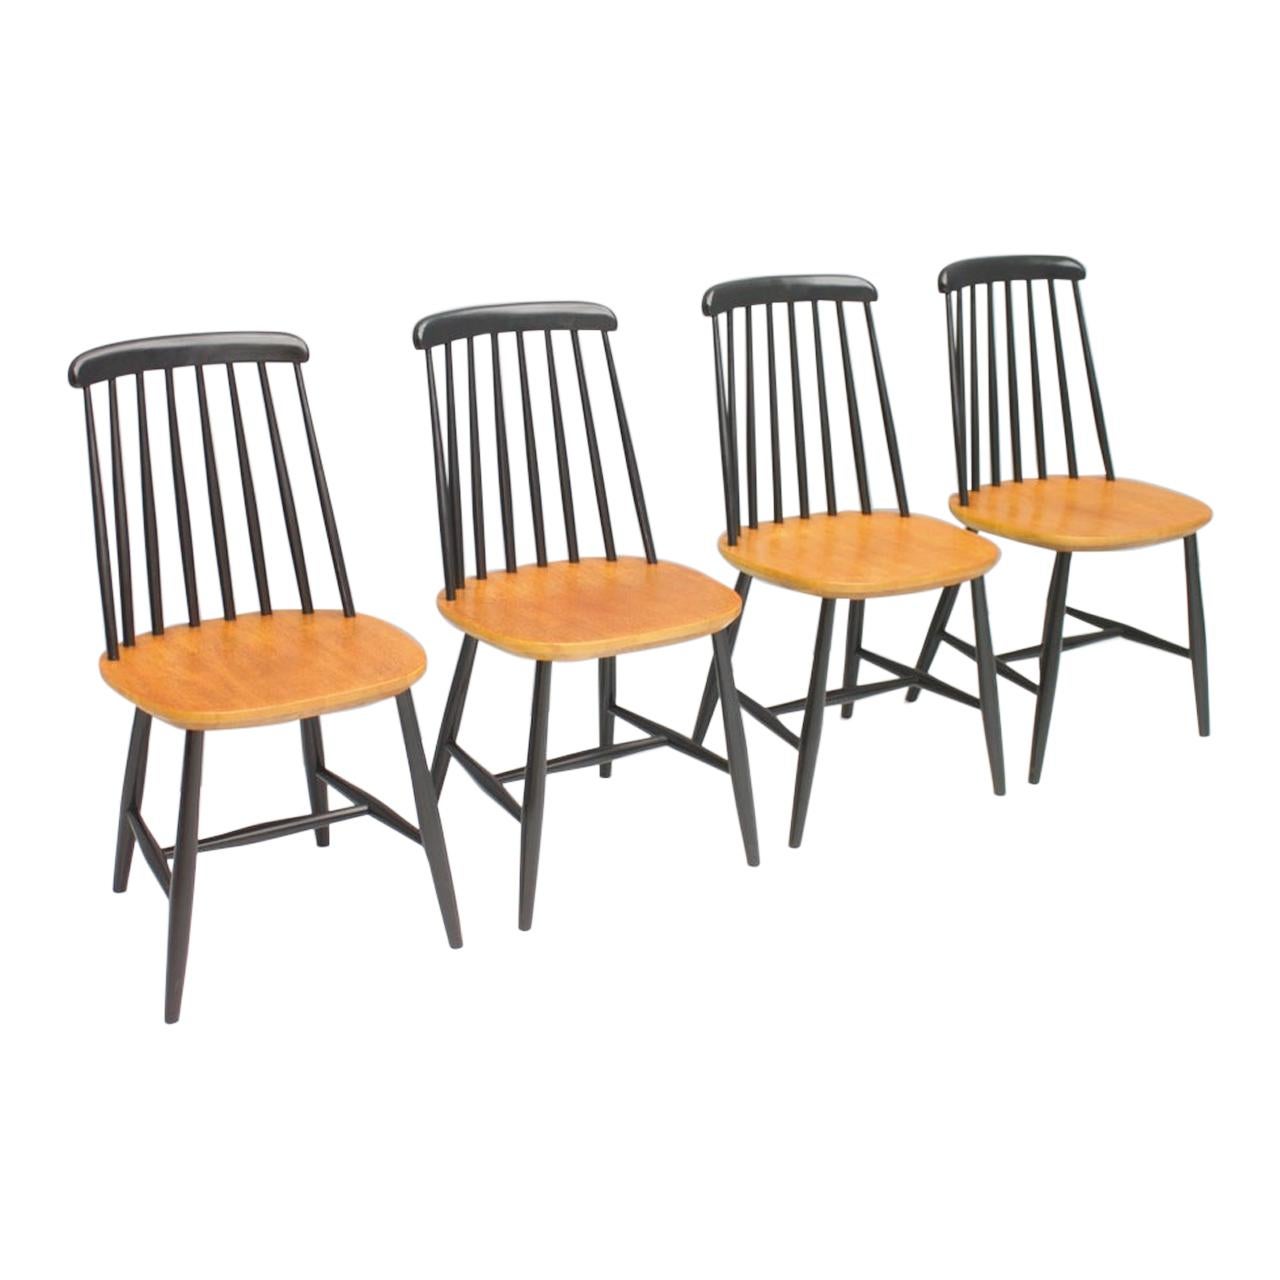 Scandinavian Dining Wood Chairs by Nesto Sweden, 1950s For Sale